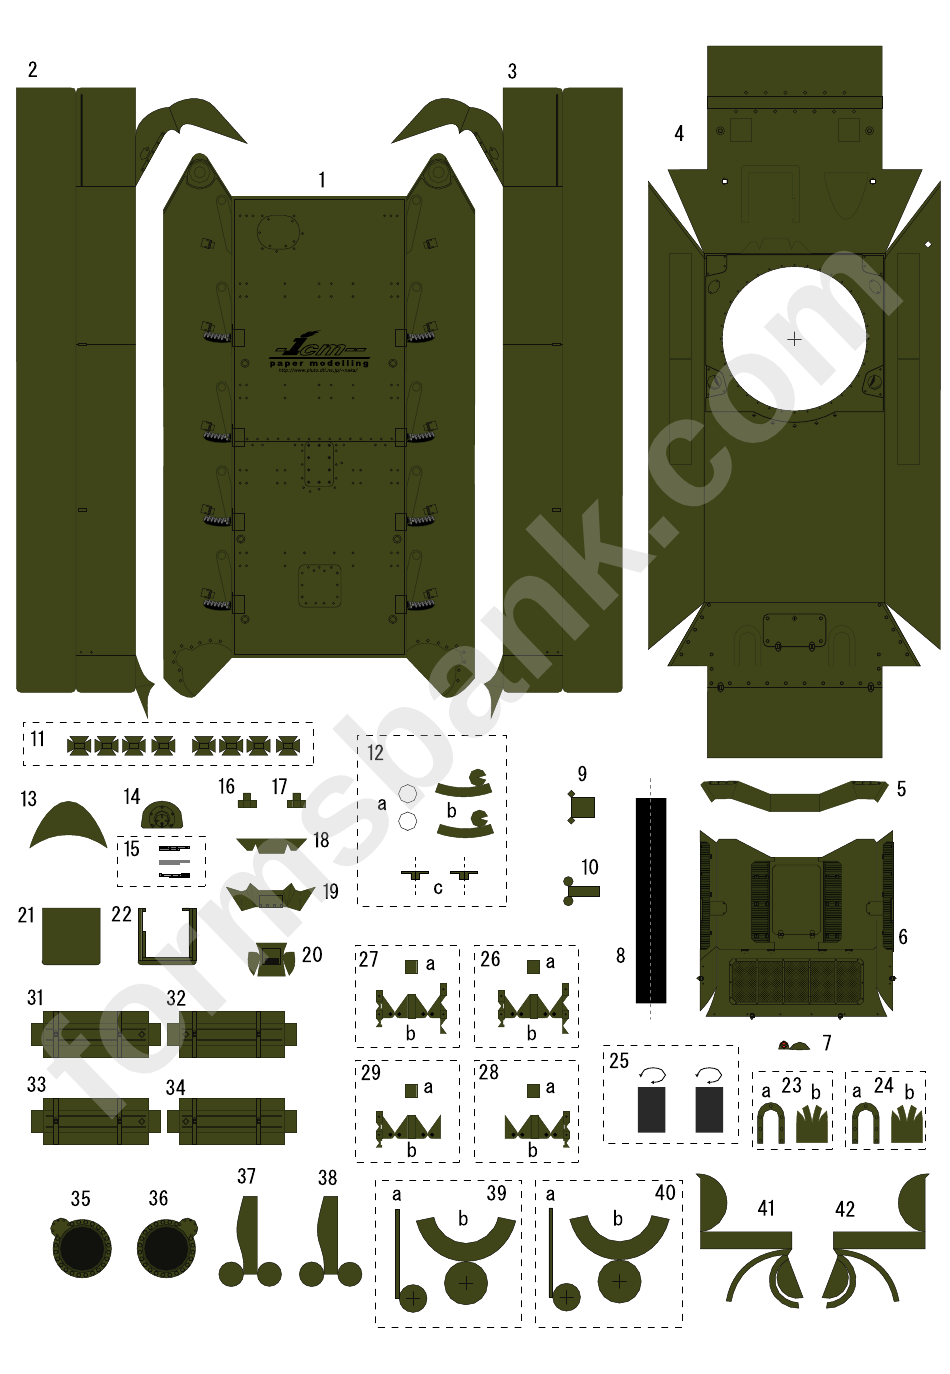 Paper Tank Cut-Out Template